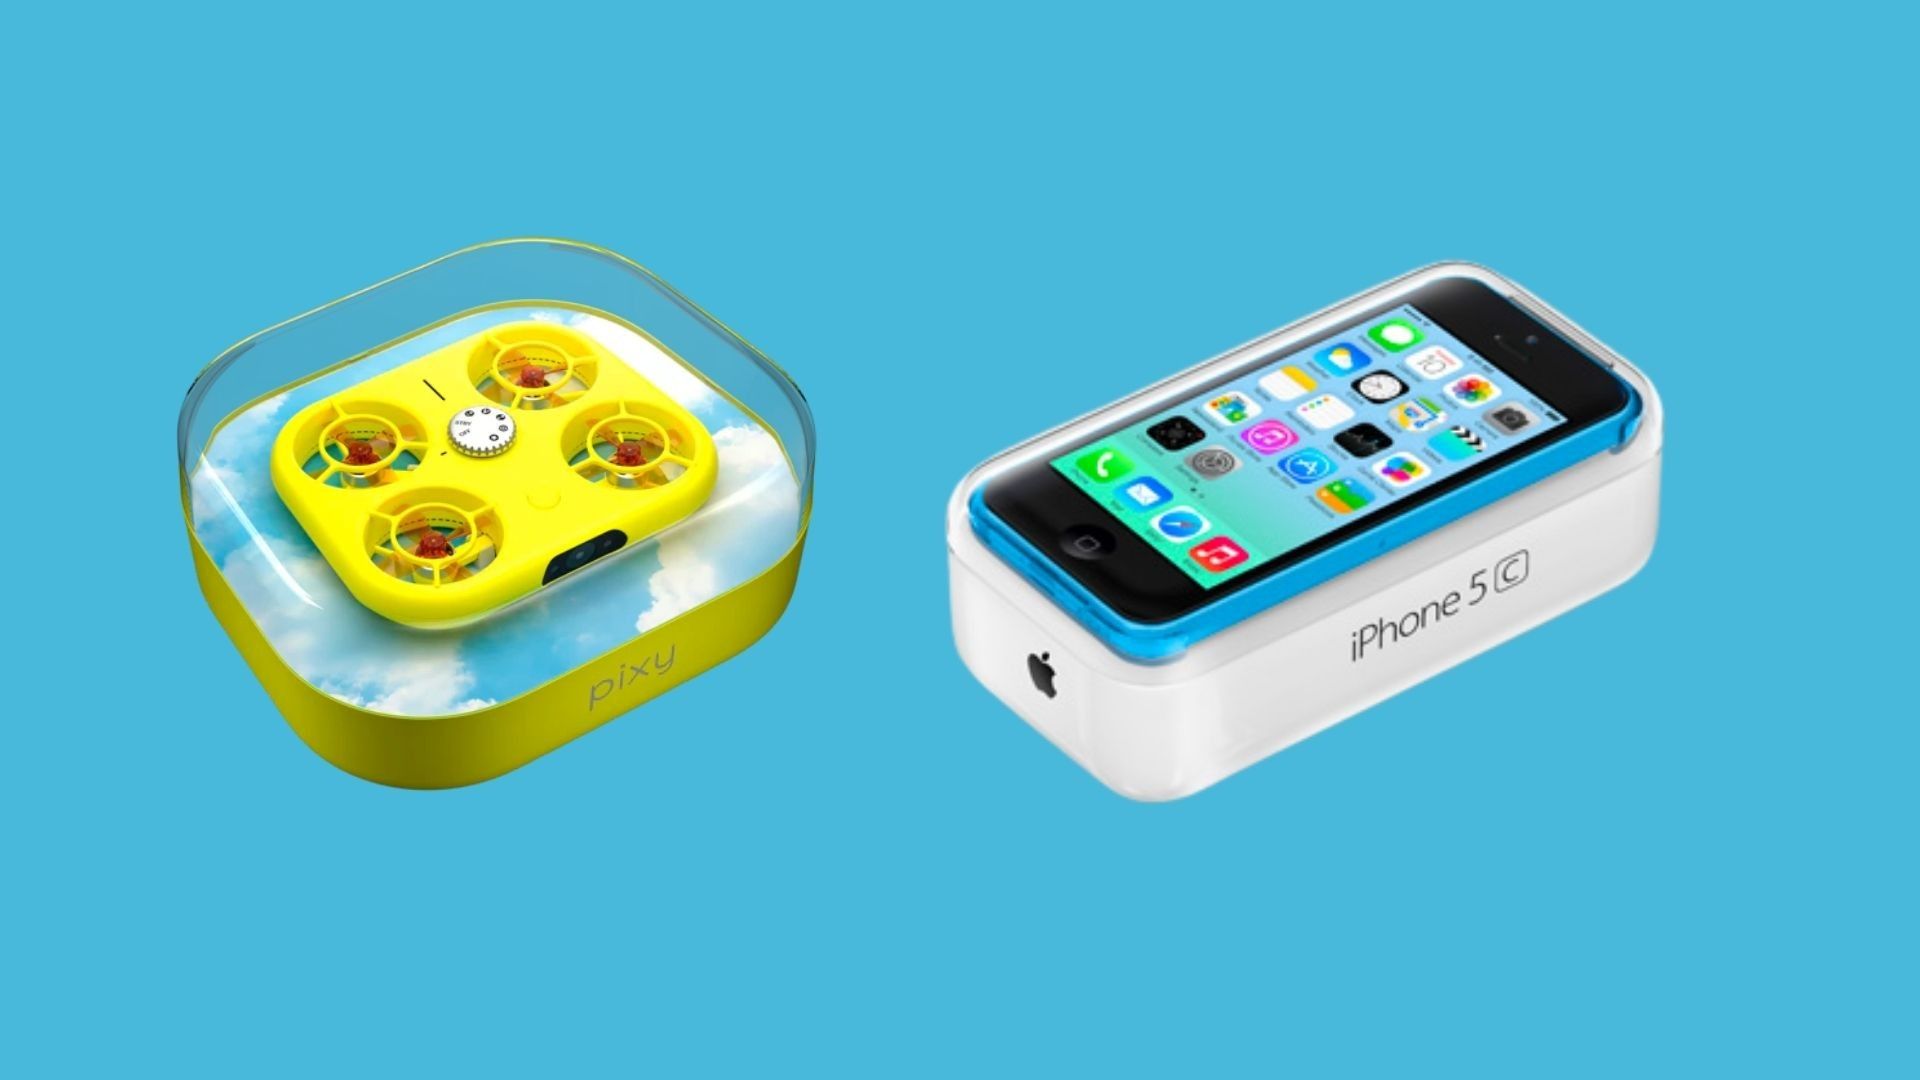 Pixy drone packaging compared to Apple's iPhone 5C box